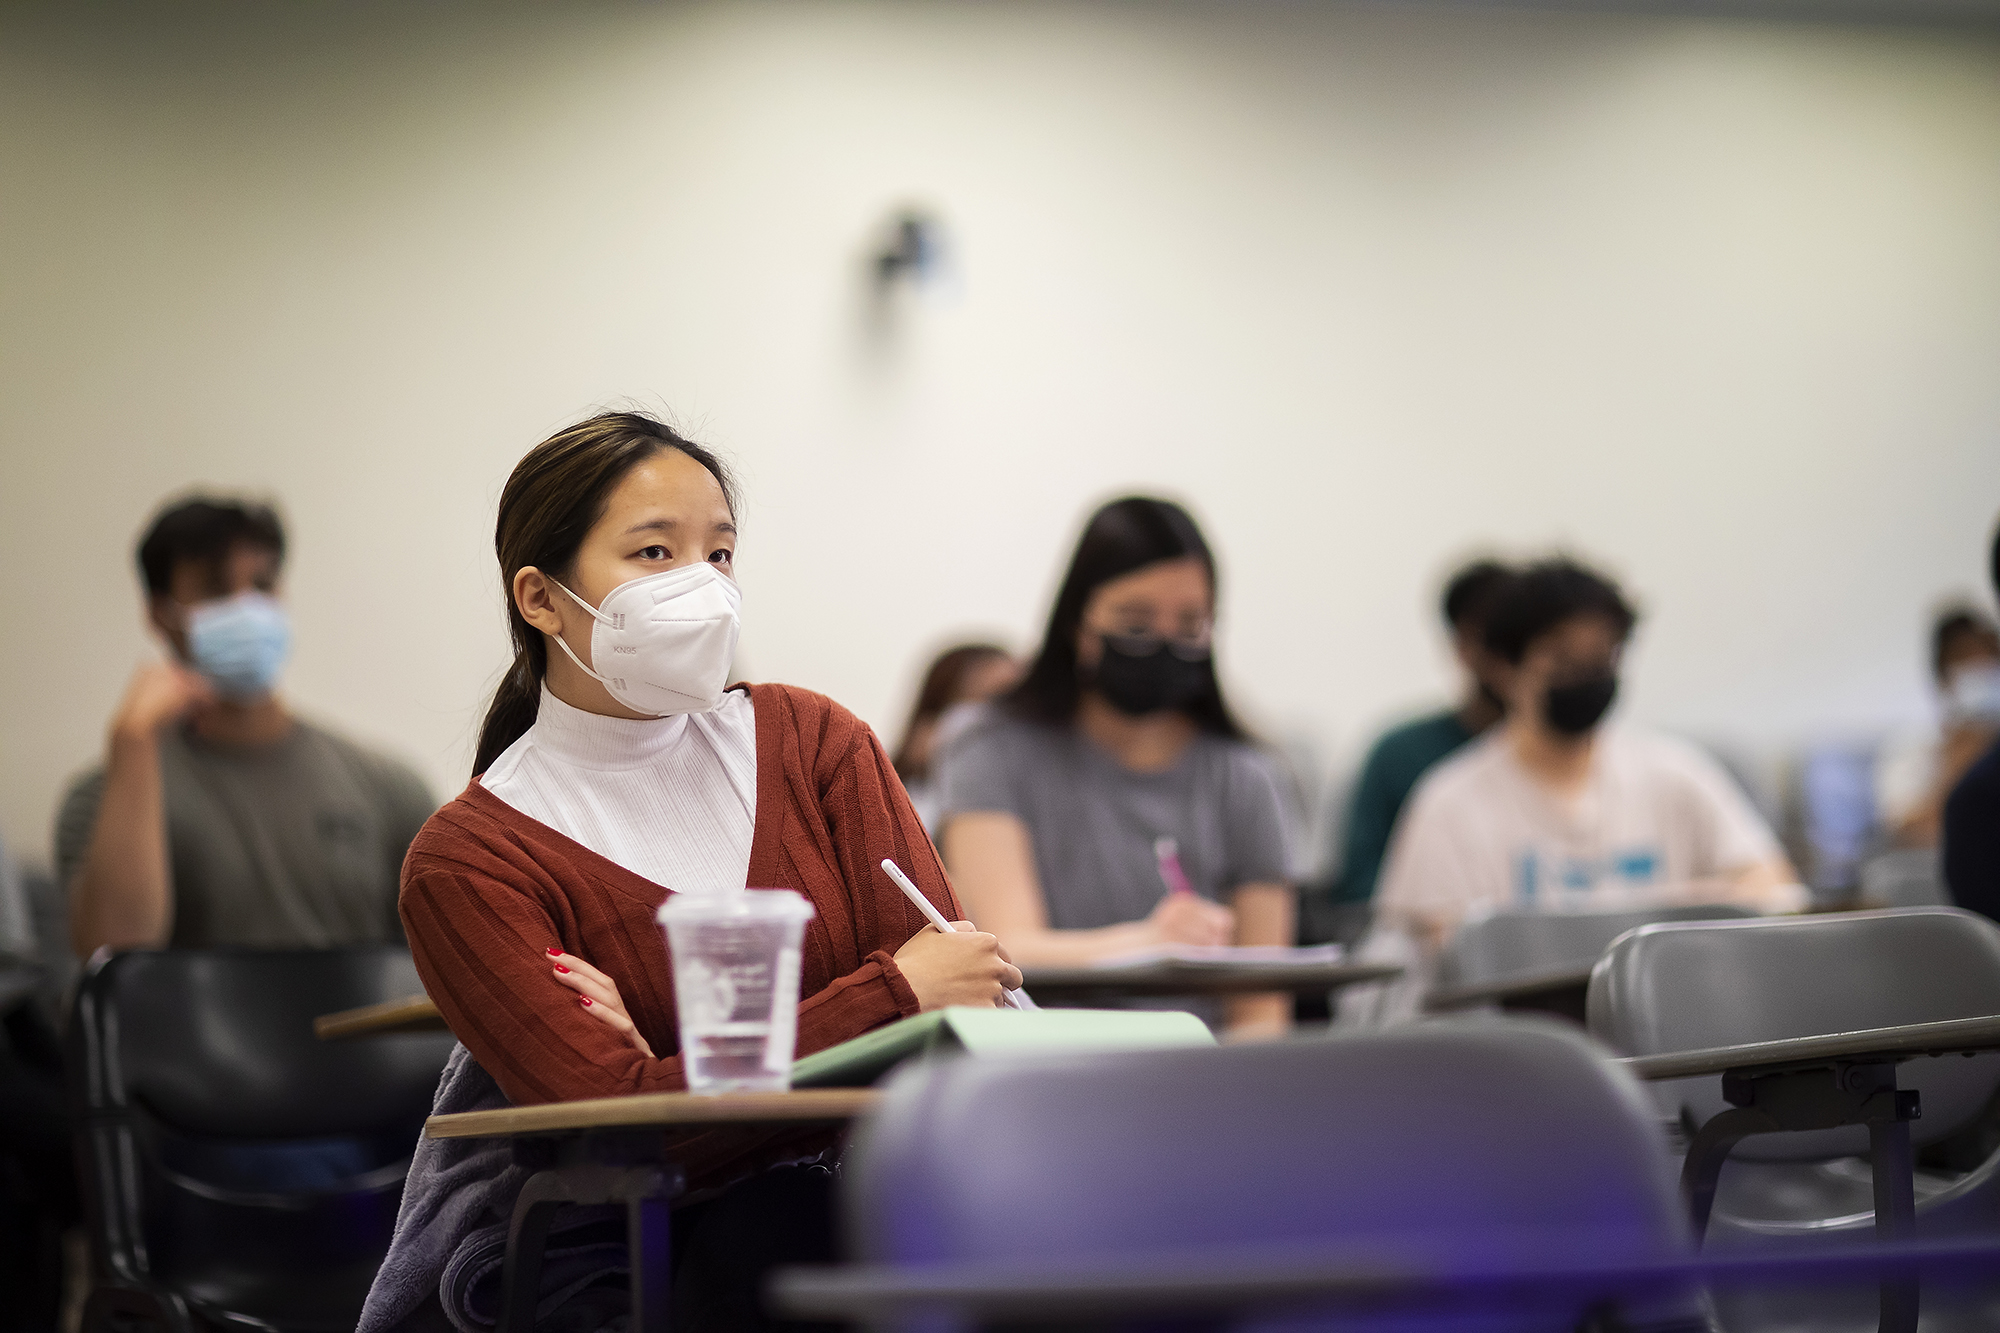 several students sitting in a classroom while wearing masks